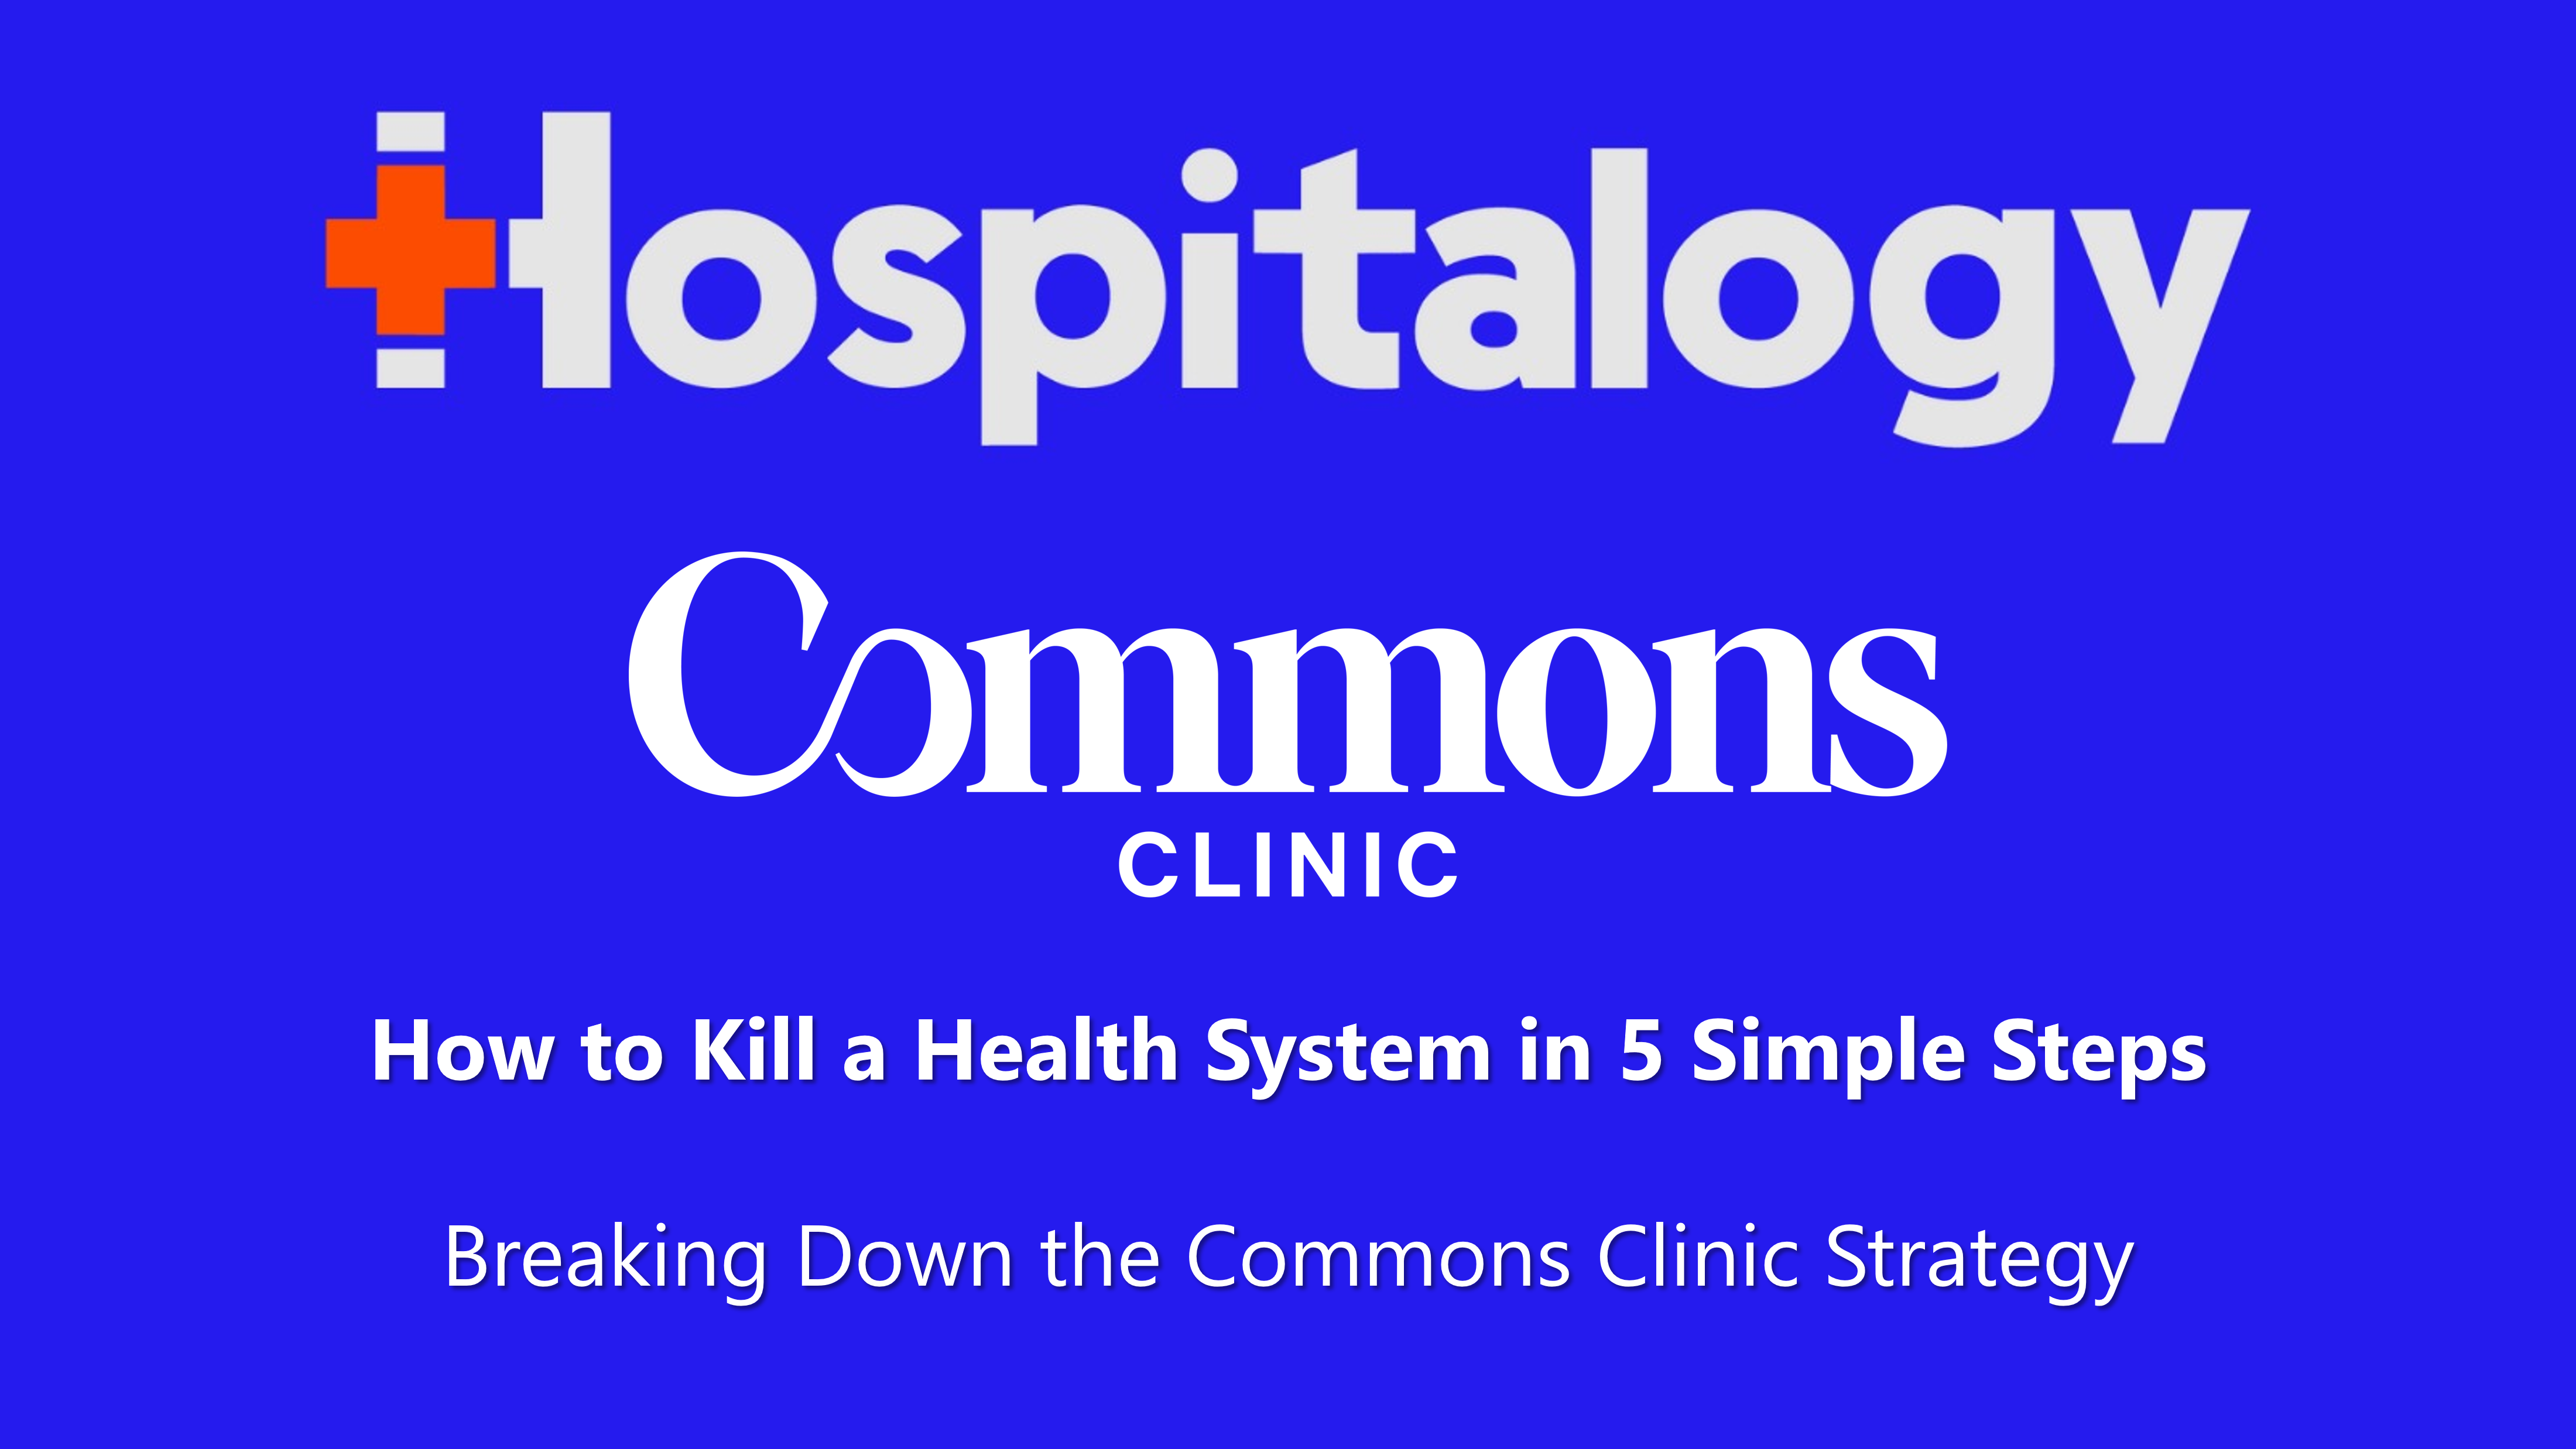 How to Kill a Health System in 5 Simple Steps: Breaking Down the Commons Clinic Strategy